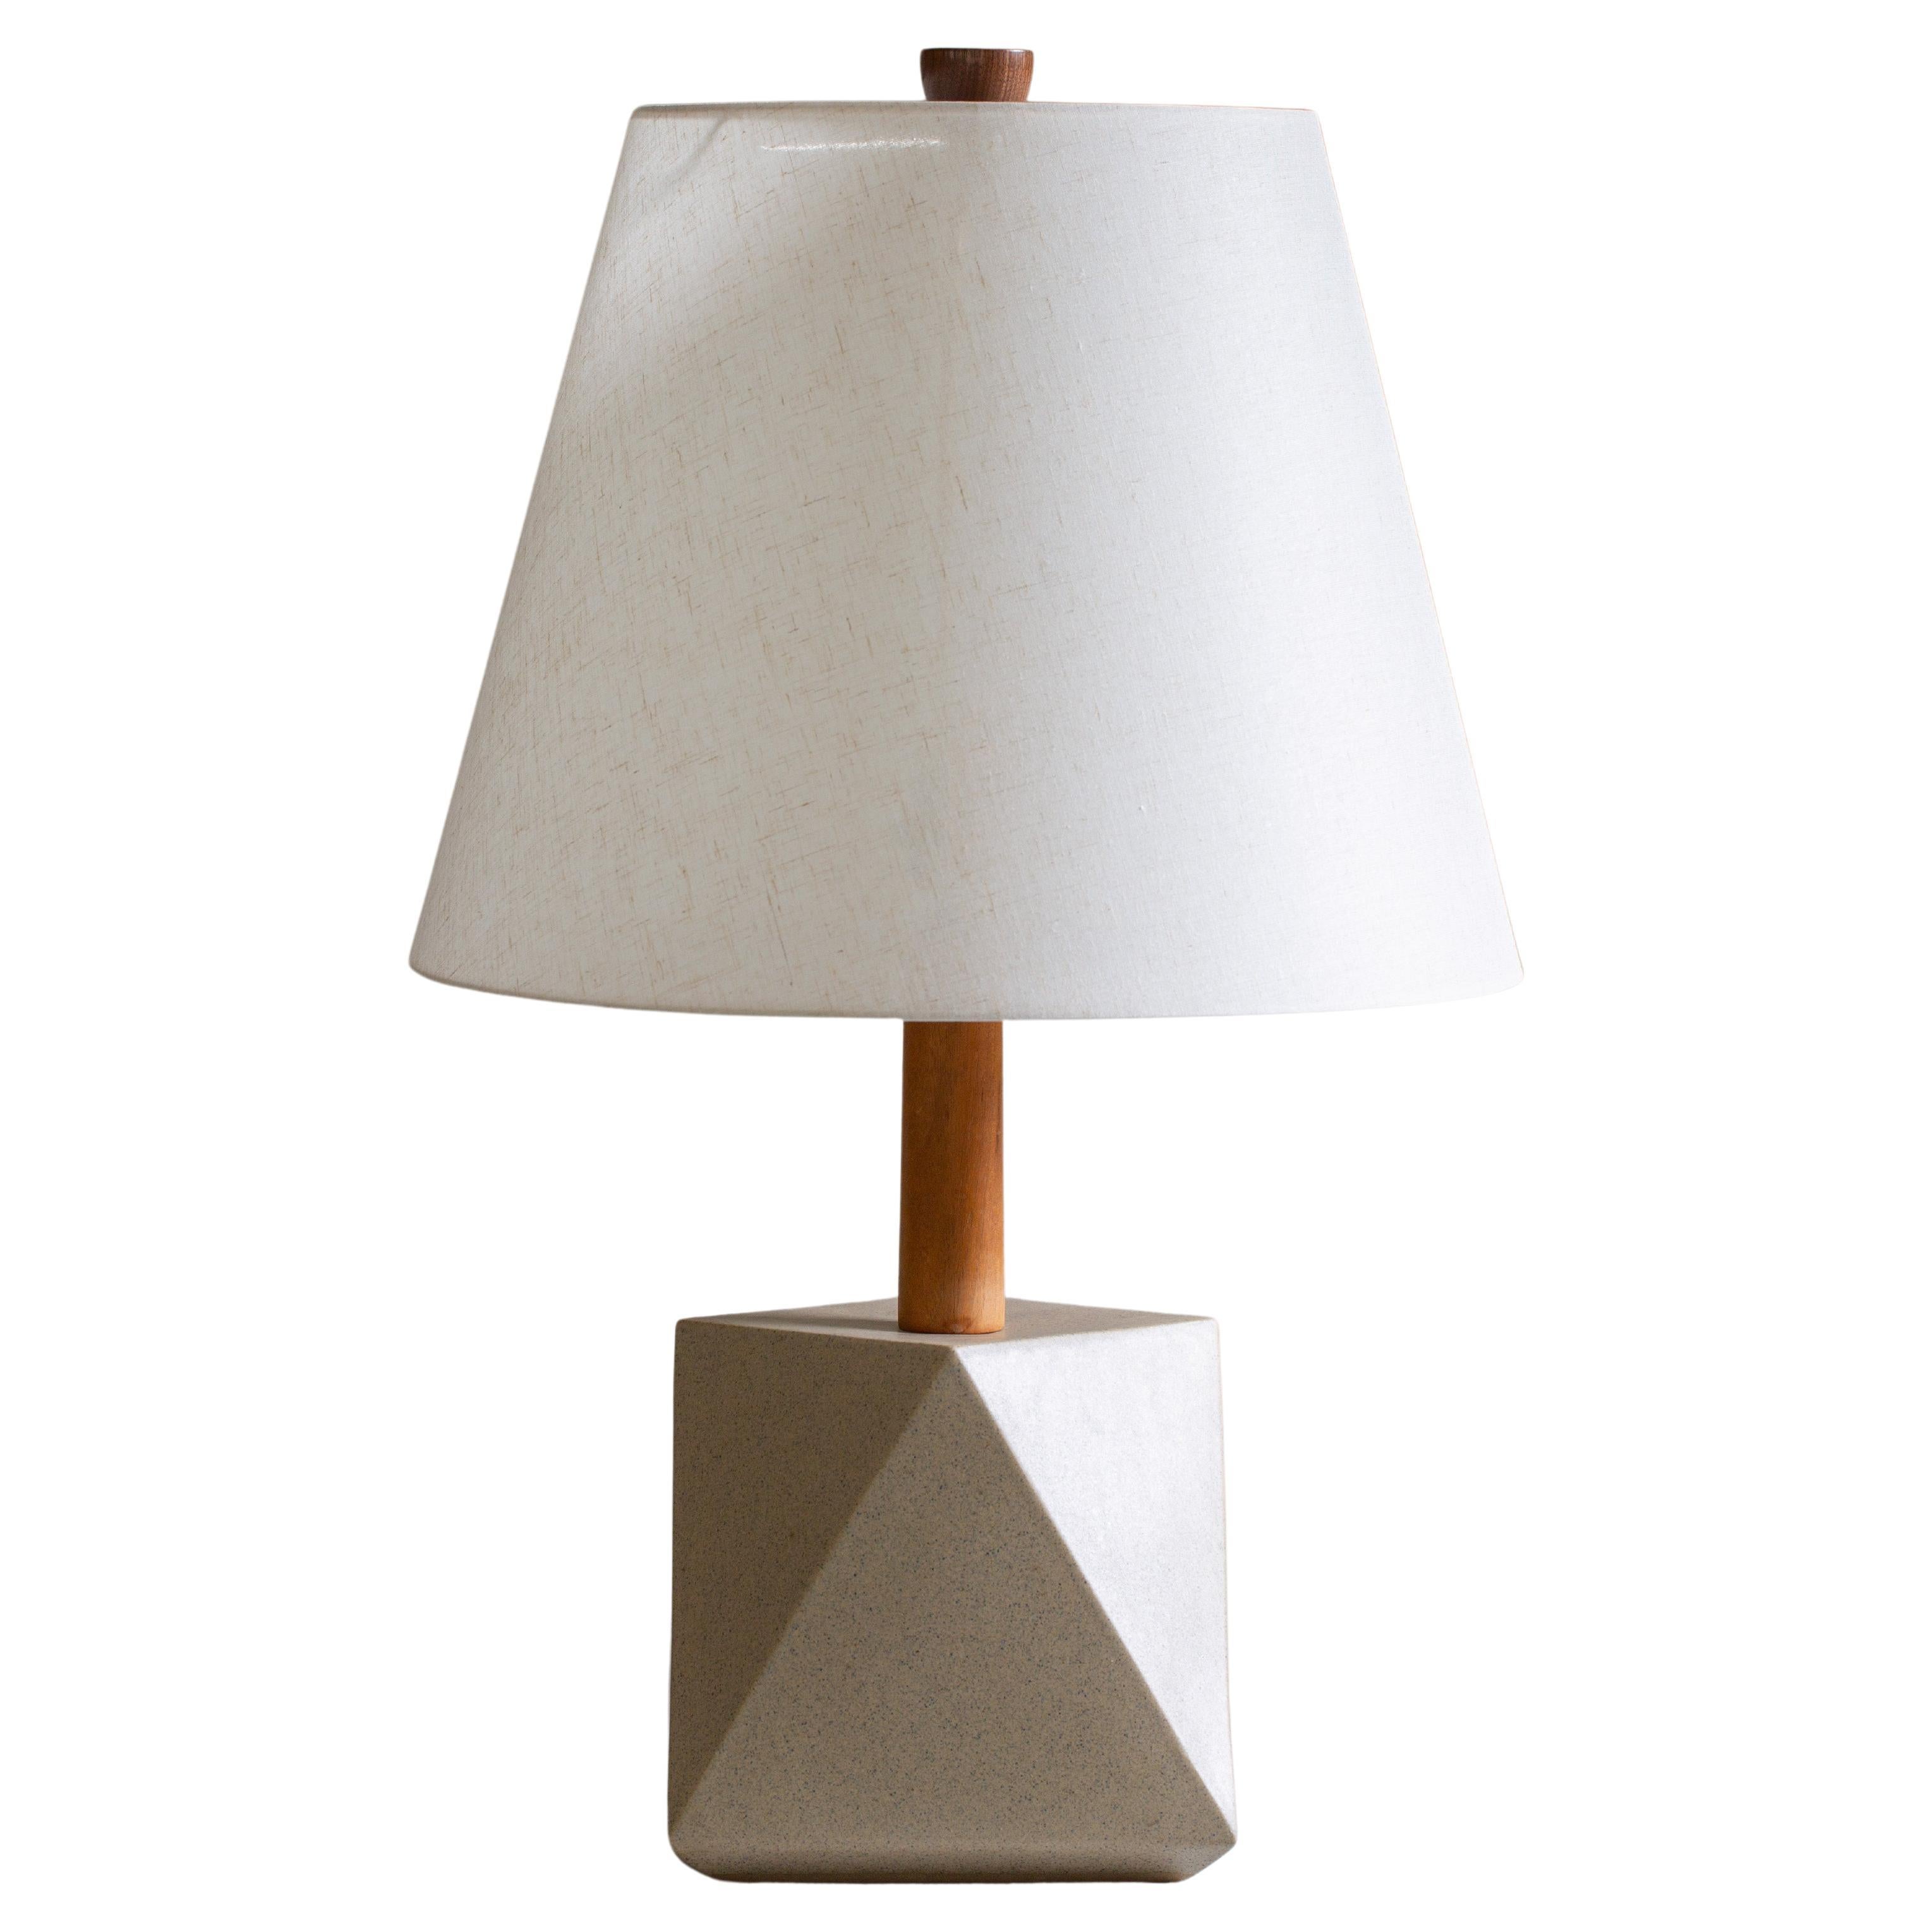 1960s M-248 Geometric Table Lamp by Jane and Gordon Martz for Marshall Studios For Sale